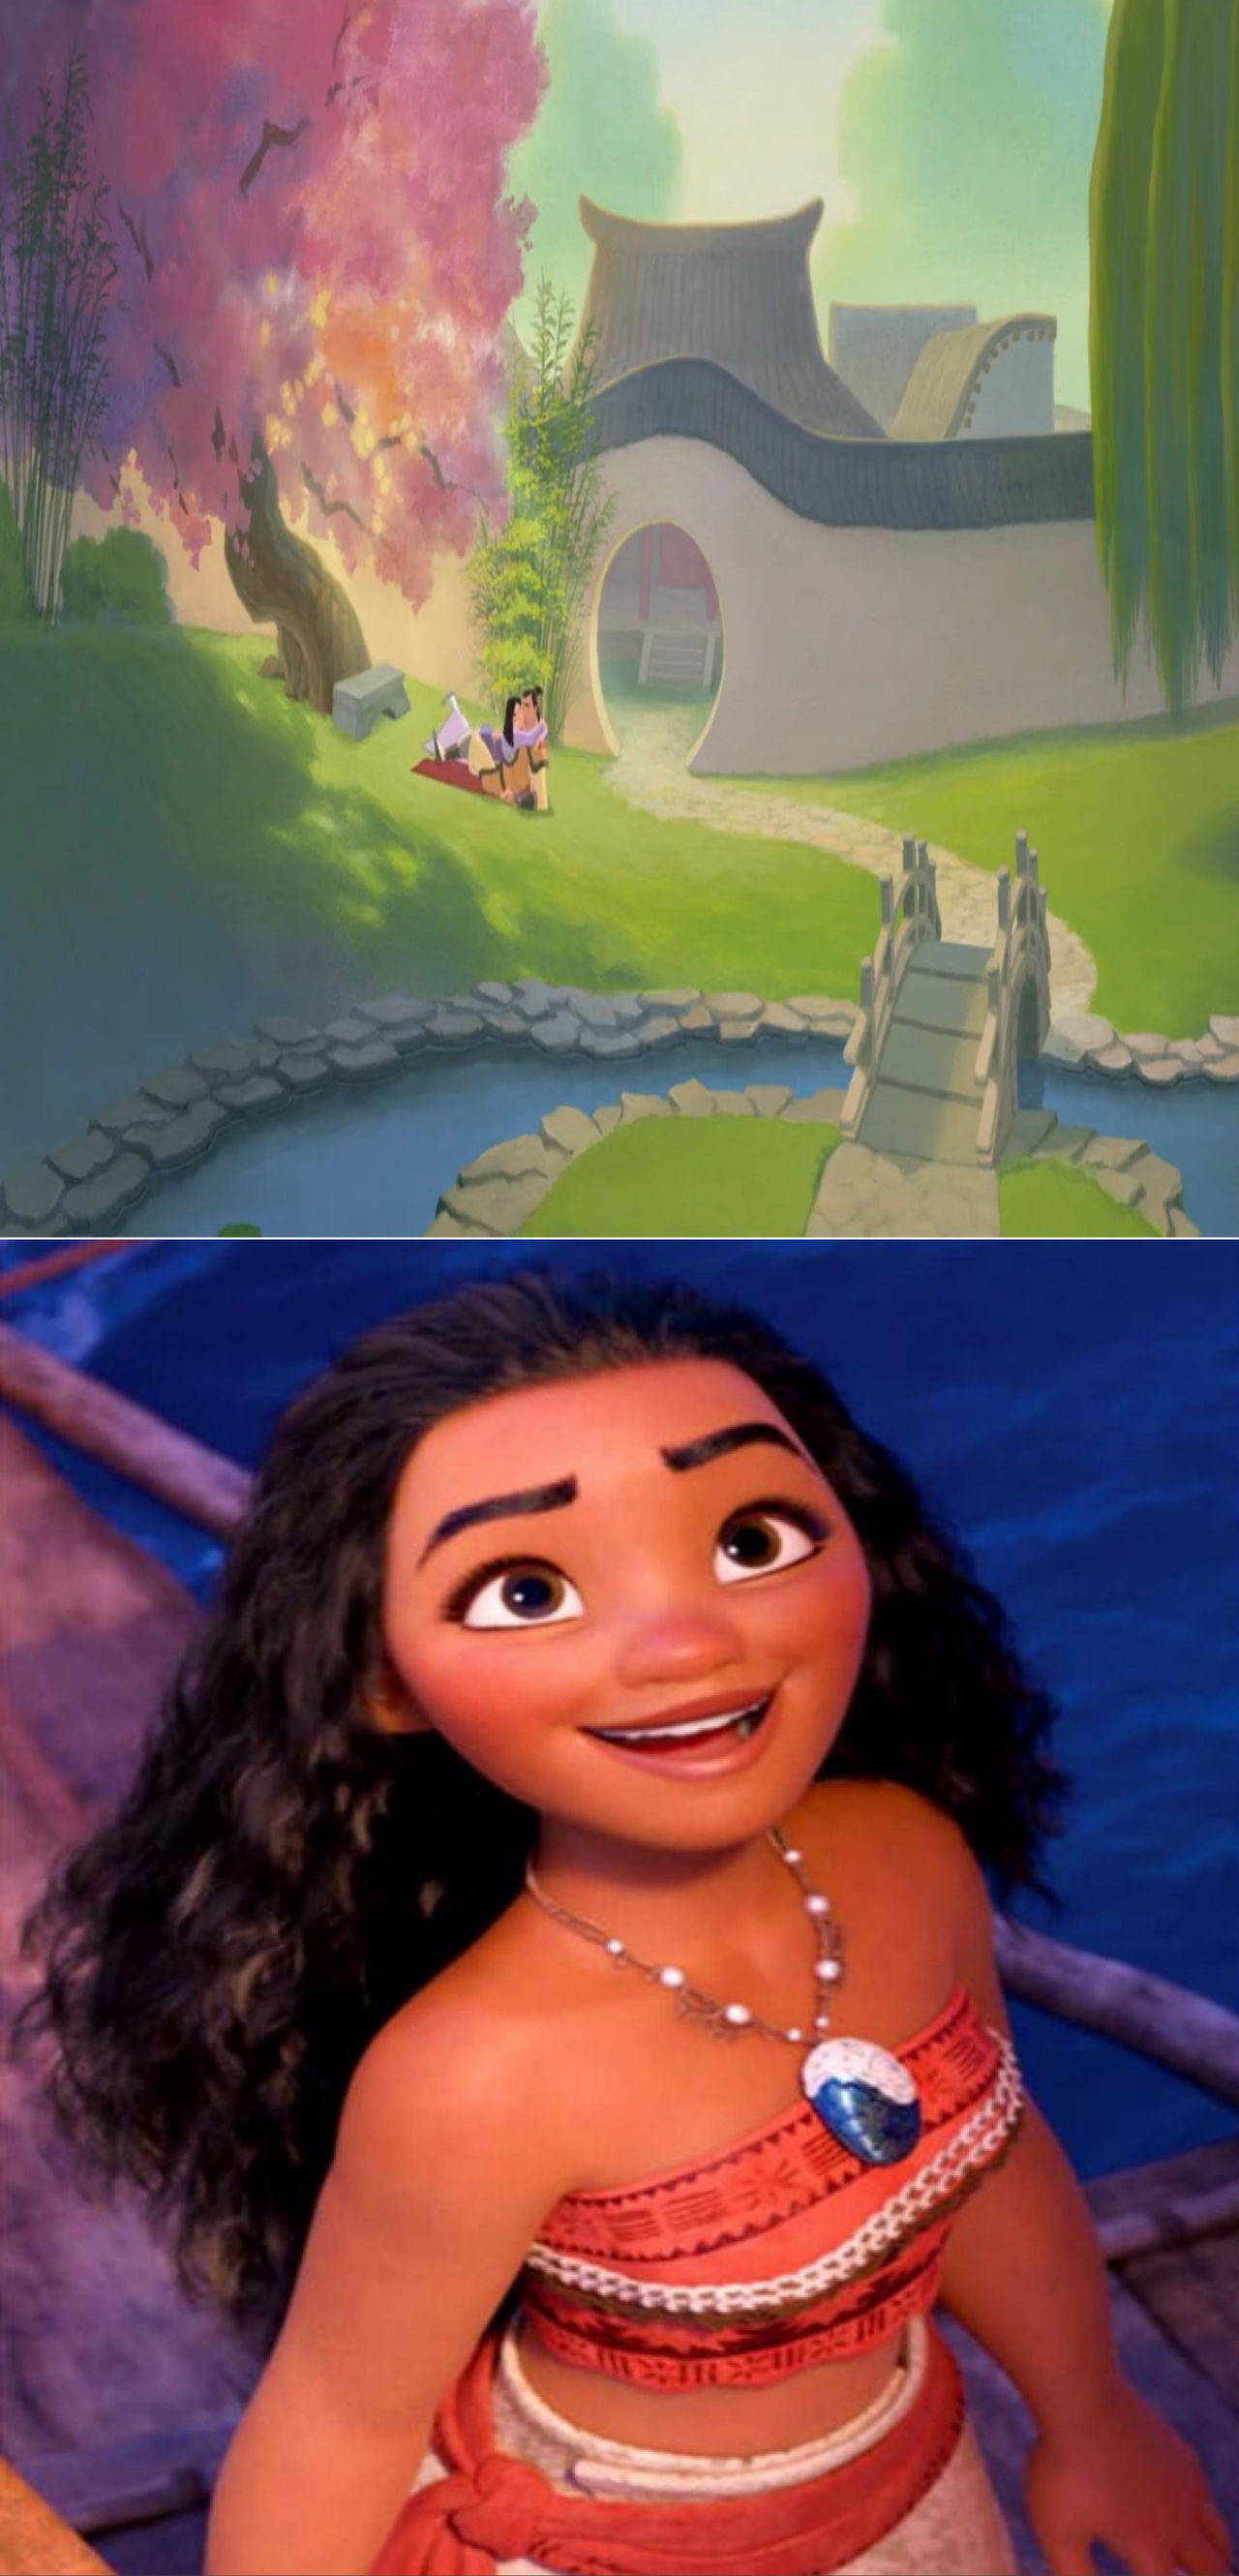 Moana Is Moved By What? by adamhatson on DeviantArt